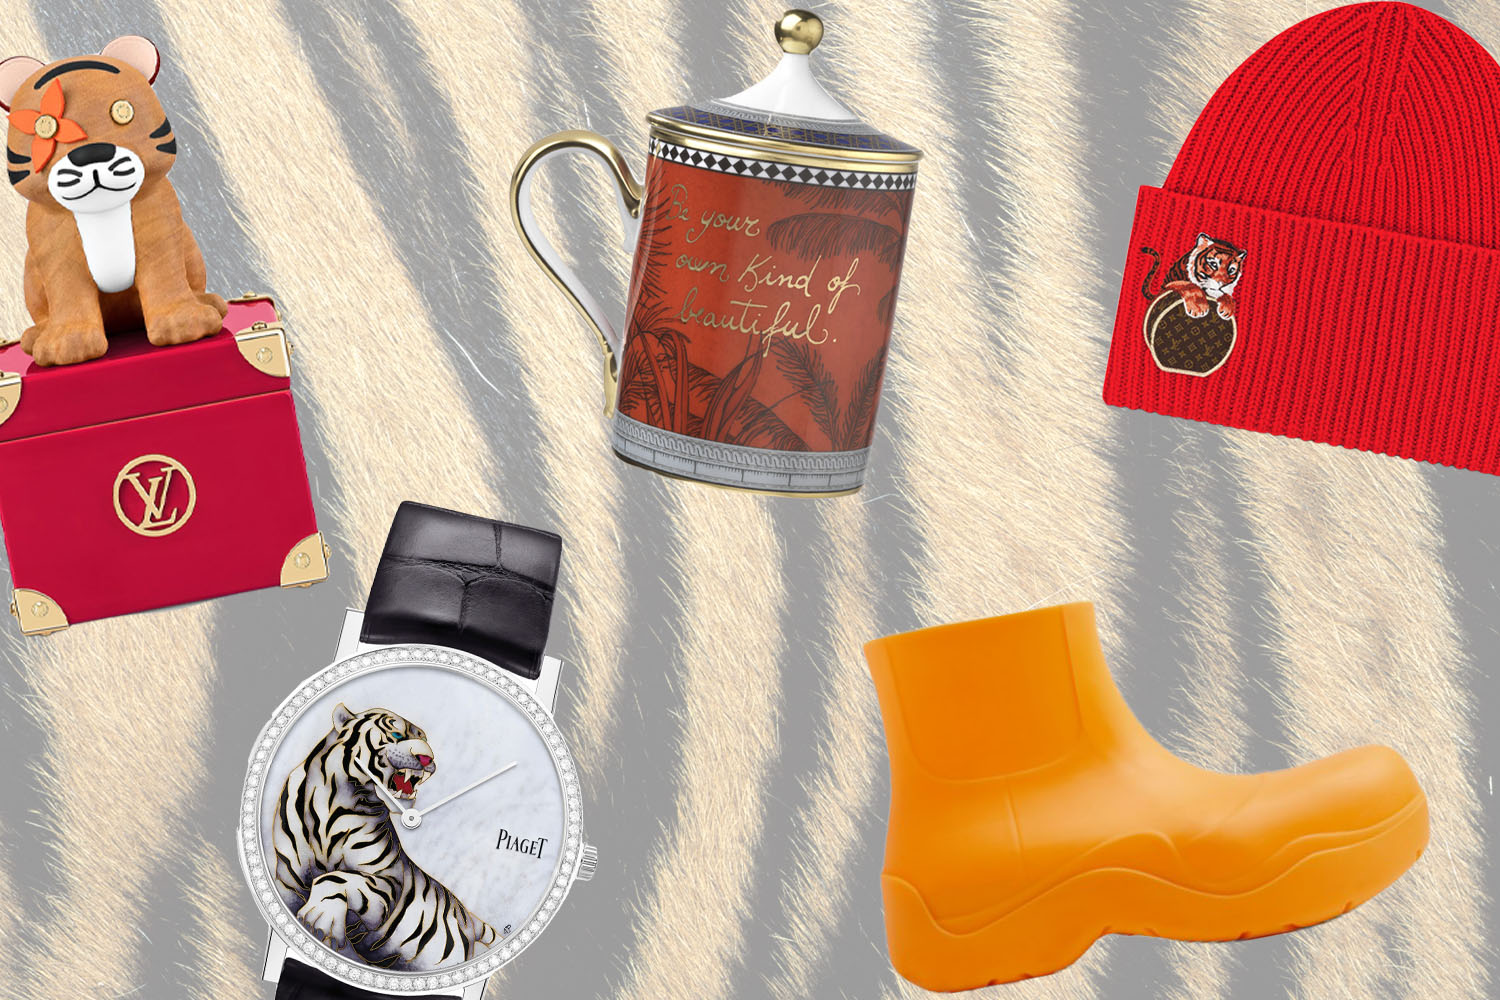 Tiger-themed fashion items from $14 and up you can wear the whole